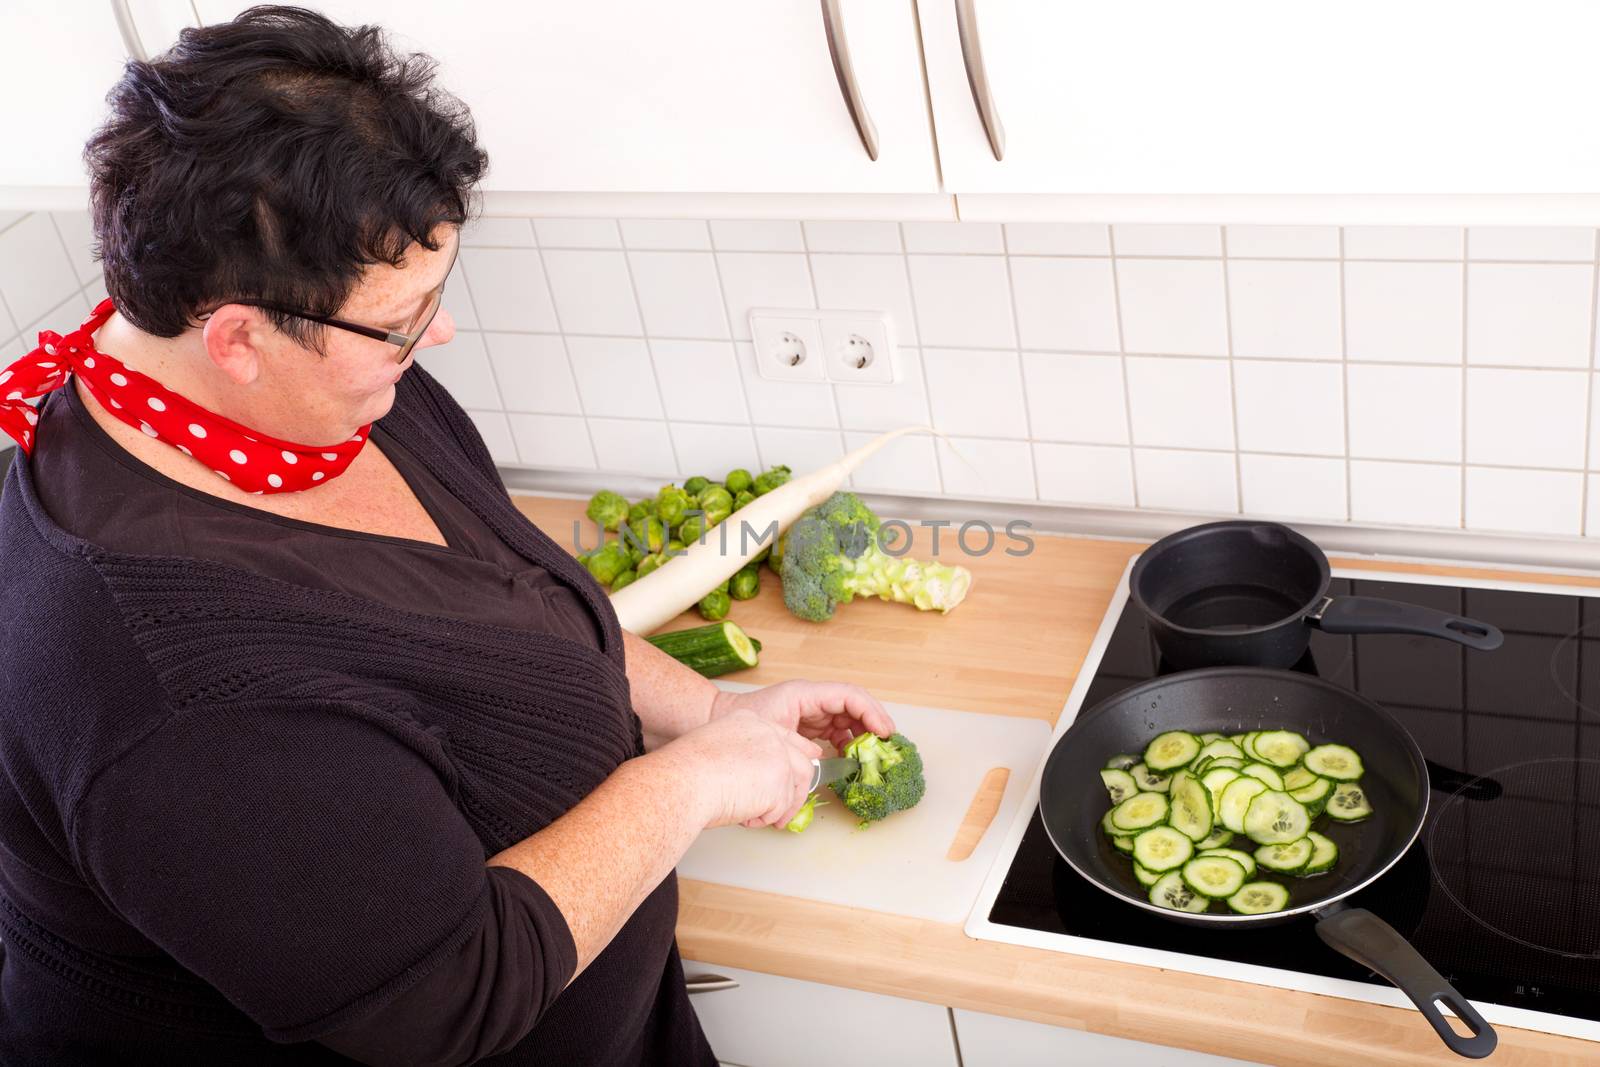 Mature overweight woman cutting vegetables in the kitchen.
